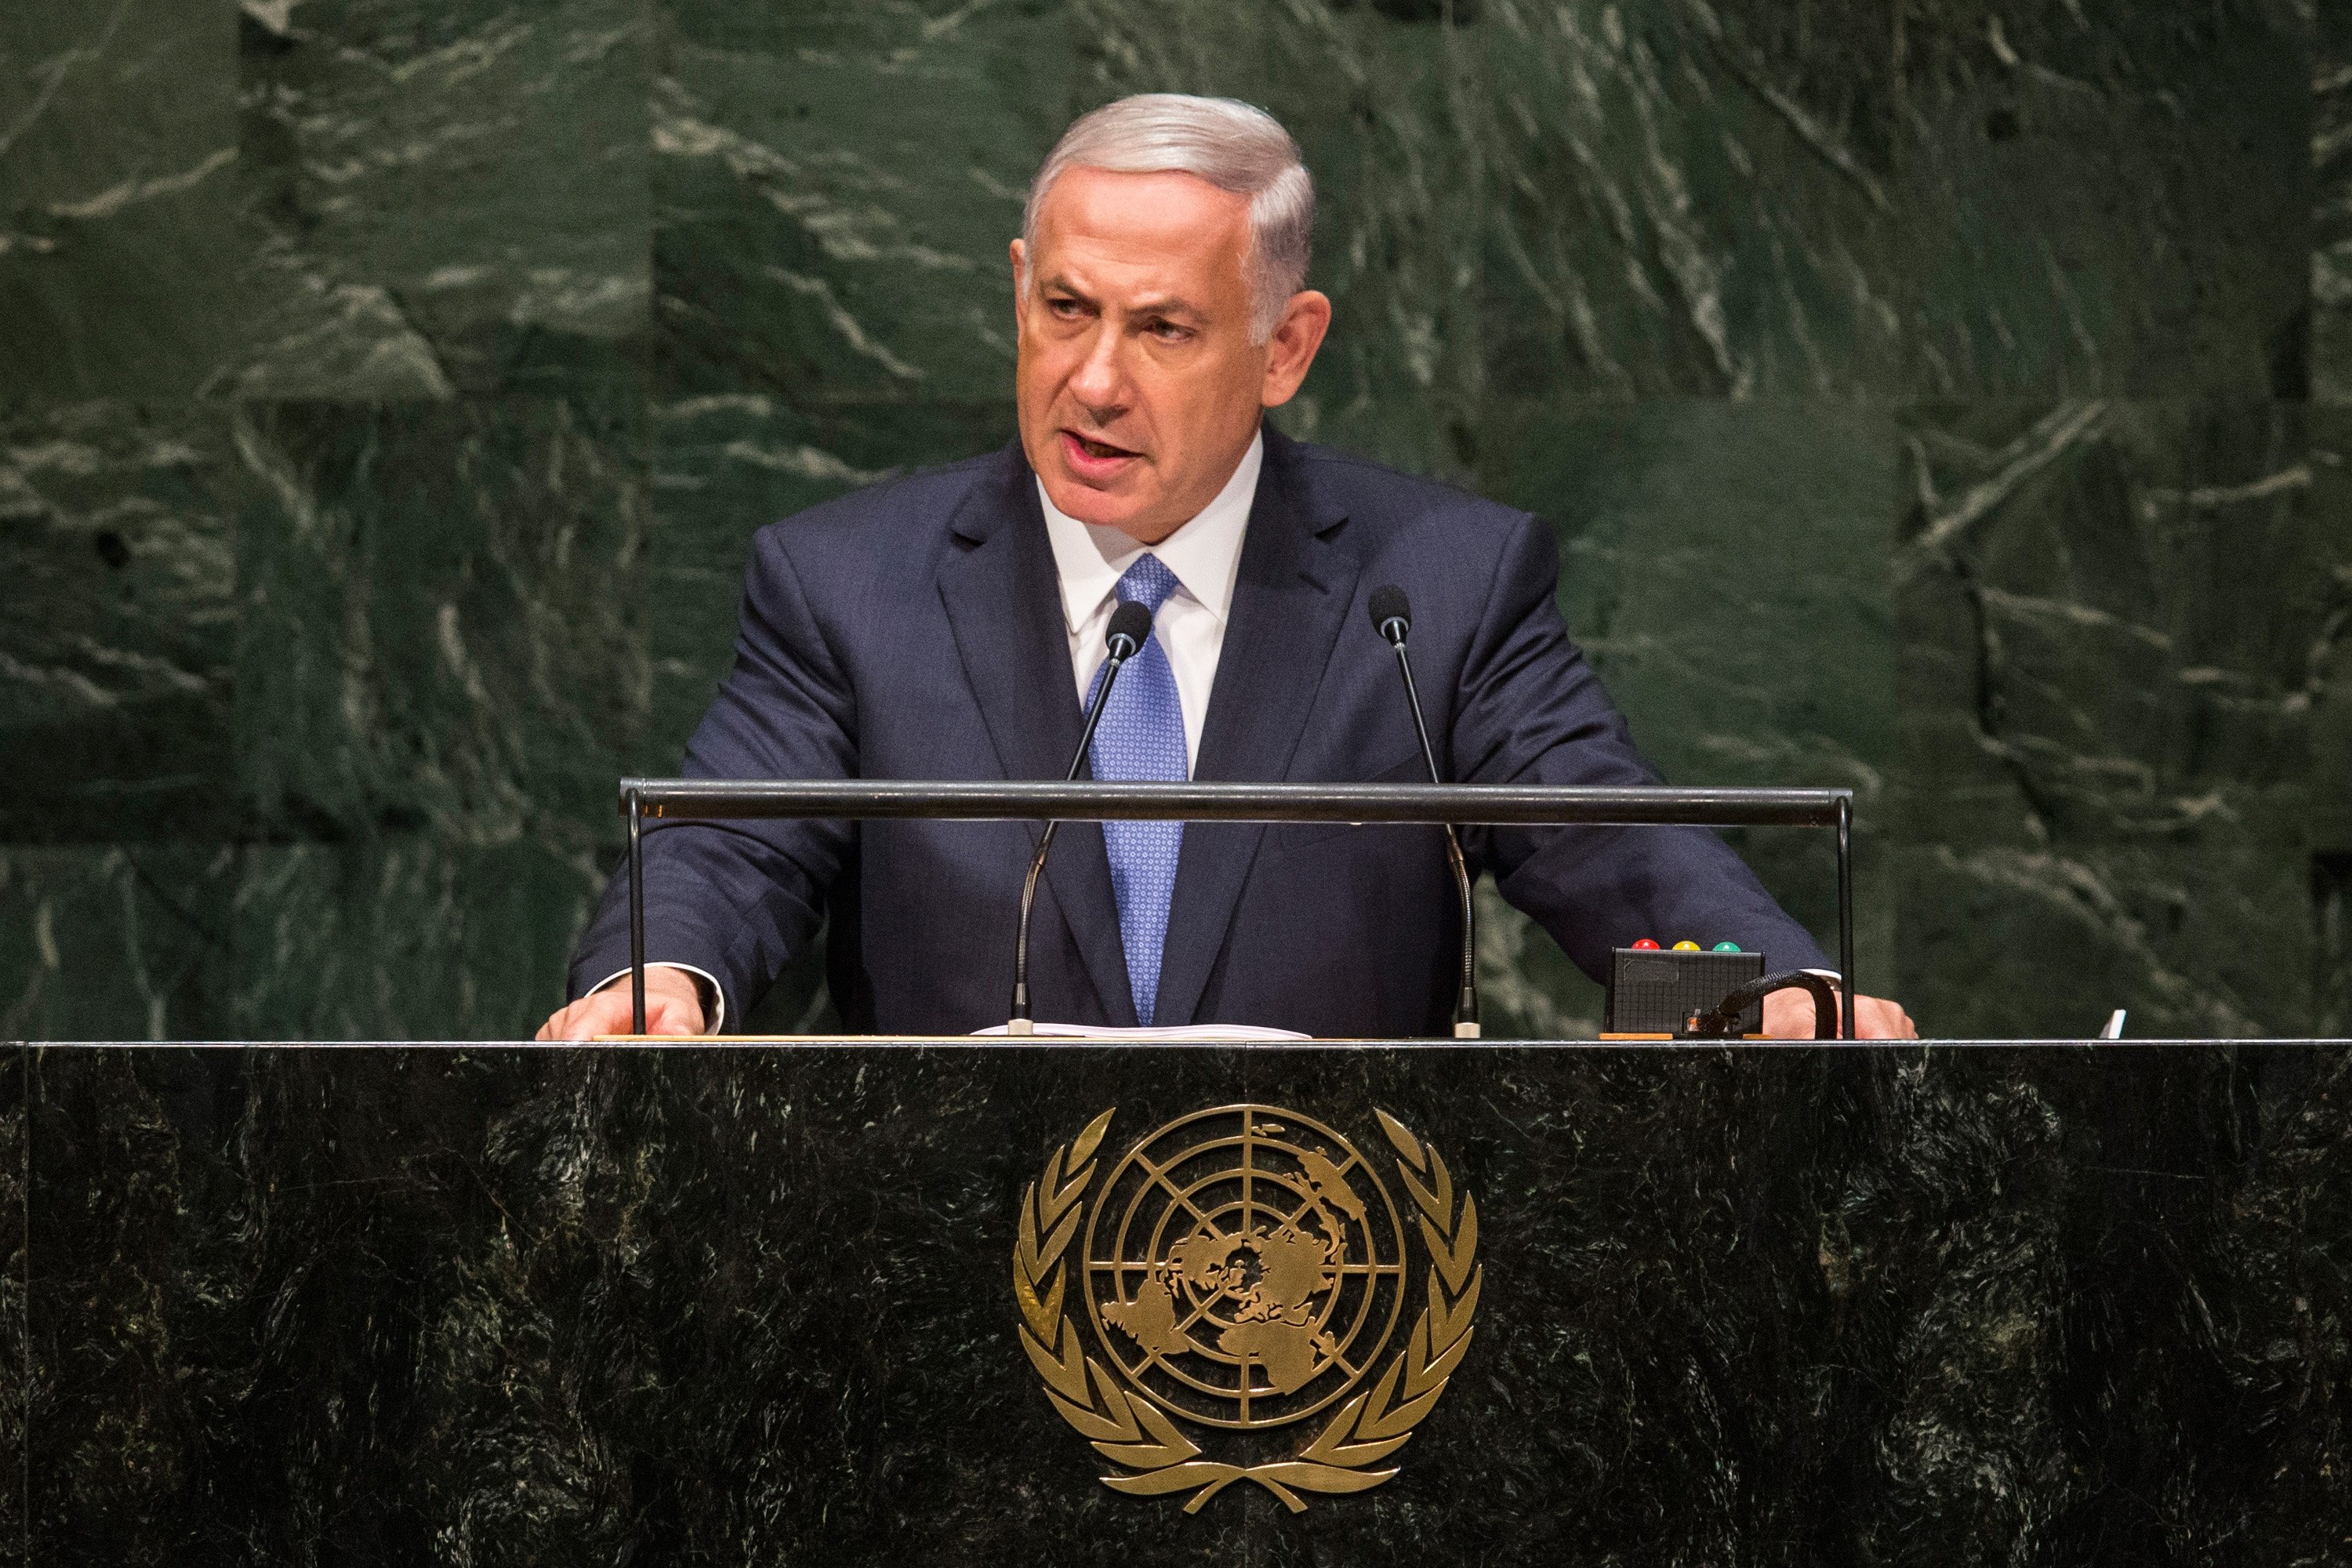 Prime Minister of Israel Benjamin Netanyahu speaks at the 69th United Nations General Assembly on Sept. 29, 2014 in New York City. (Andrew Burton—Getty Images)